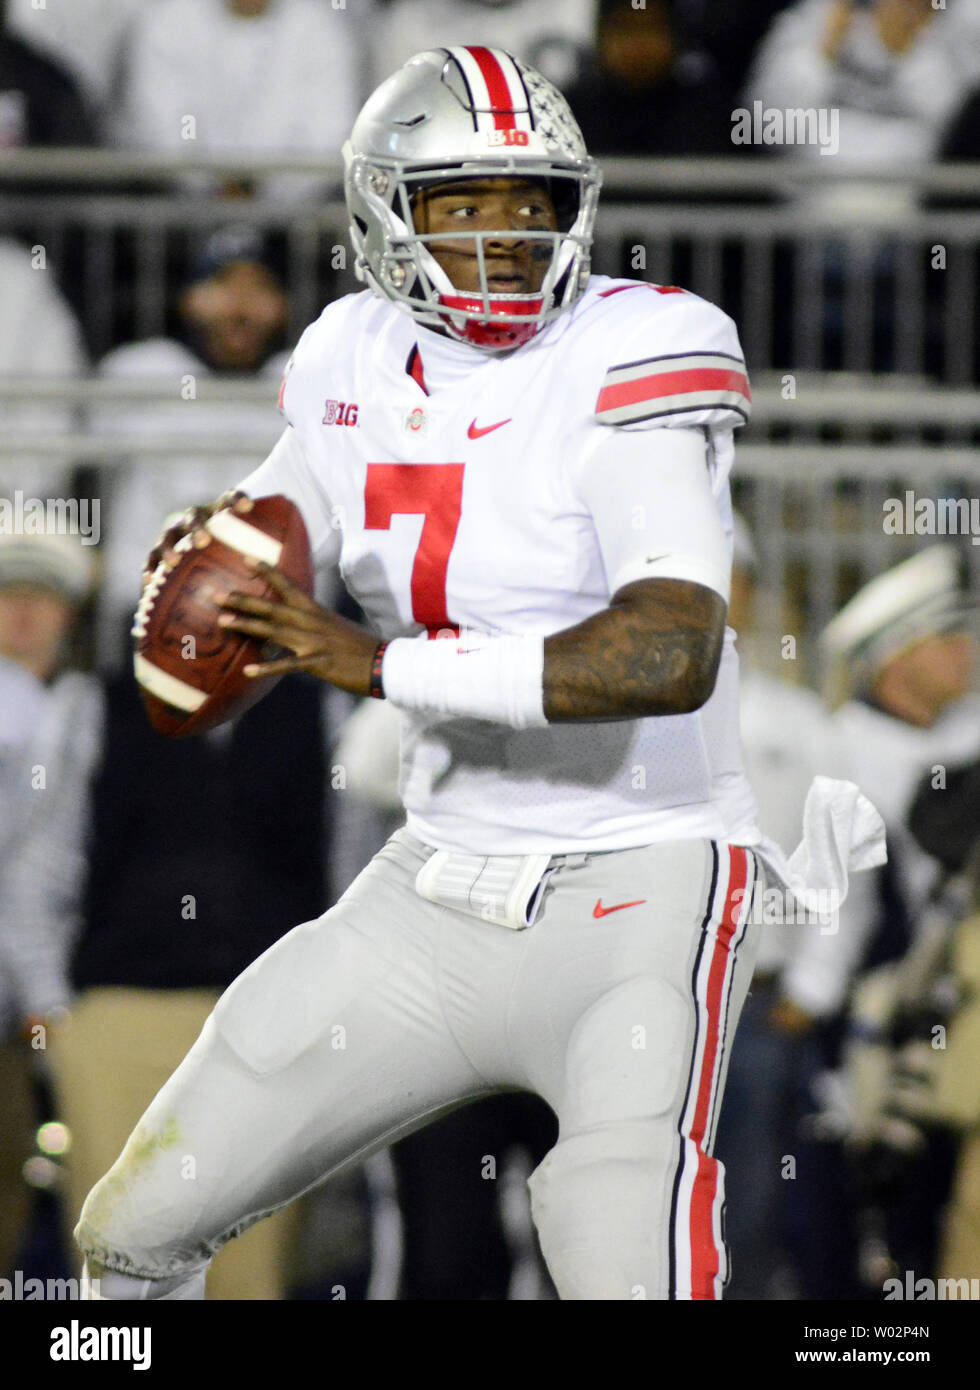 Ohio State Buckeyes quarterback Dwayne Haskins (7) steps back to pass in the second quarter against the Penn State Nittany Lions at Beaver Stadium in State College , Pennsylvania on September 29, 2018. Photo by Archie Carpenter/UPI Stock Photo